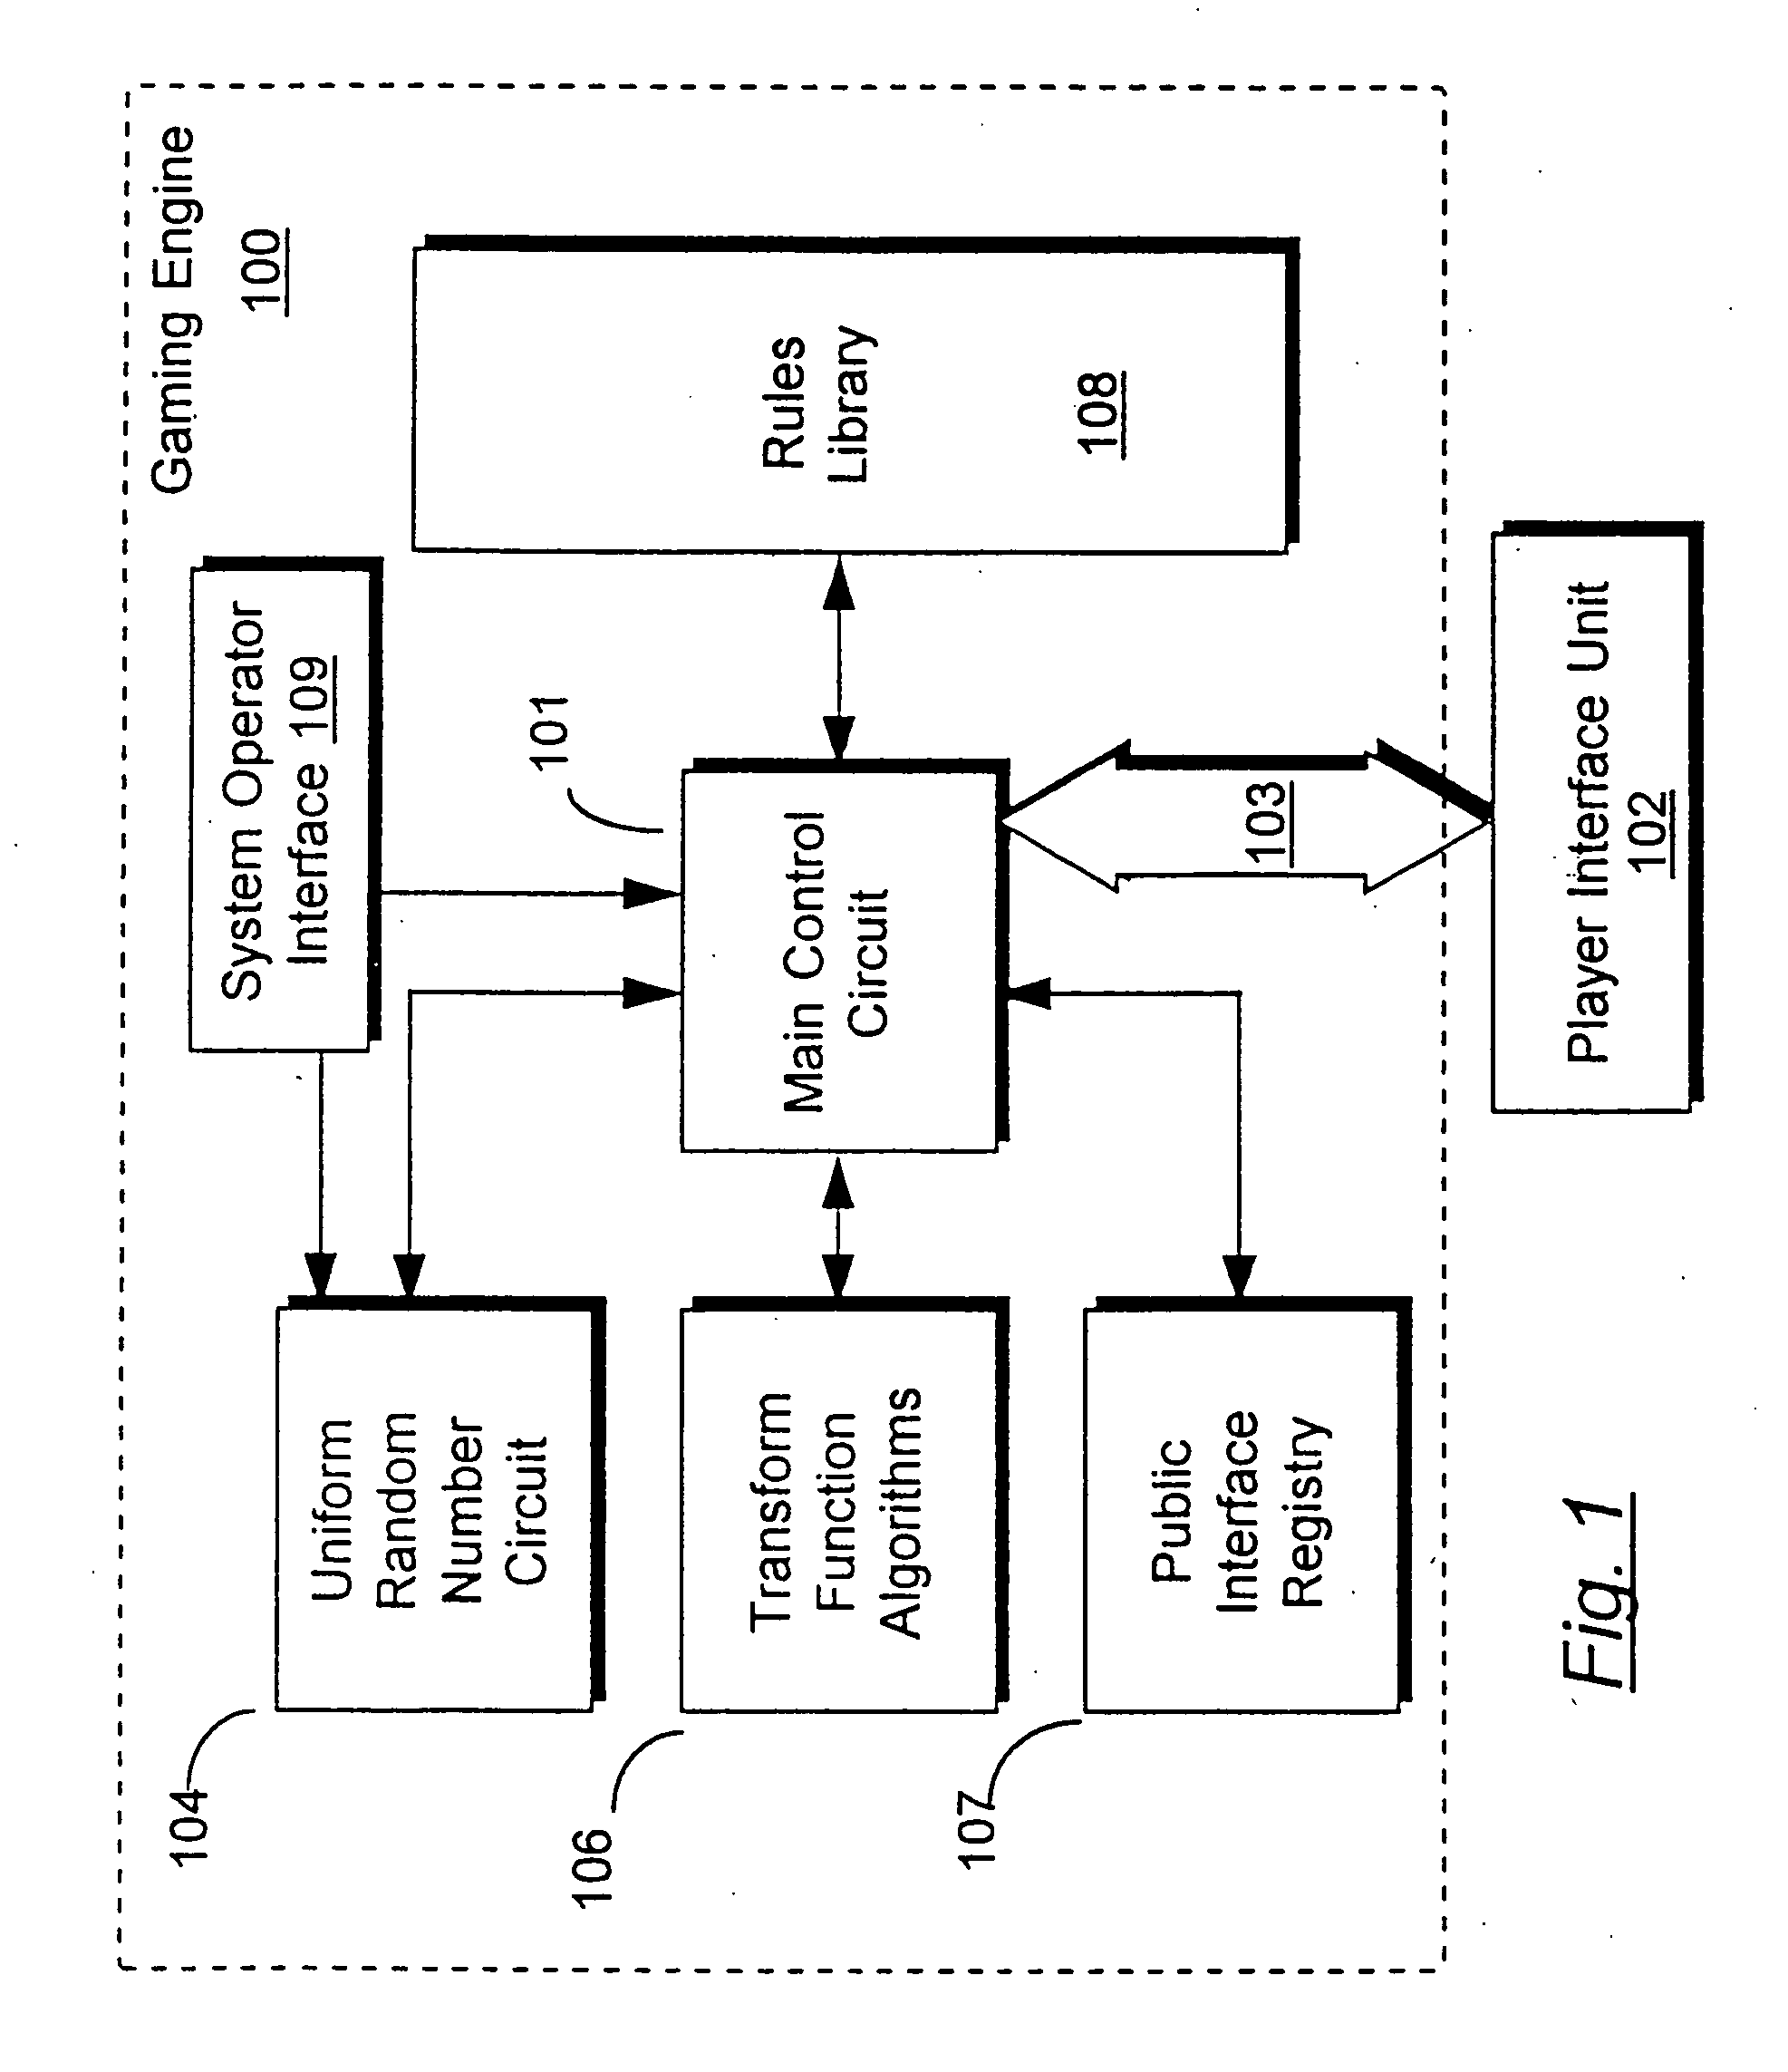 Method for control of gaming systems and for generating random numbers